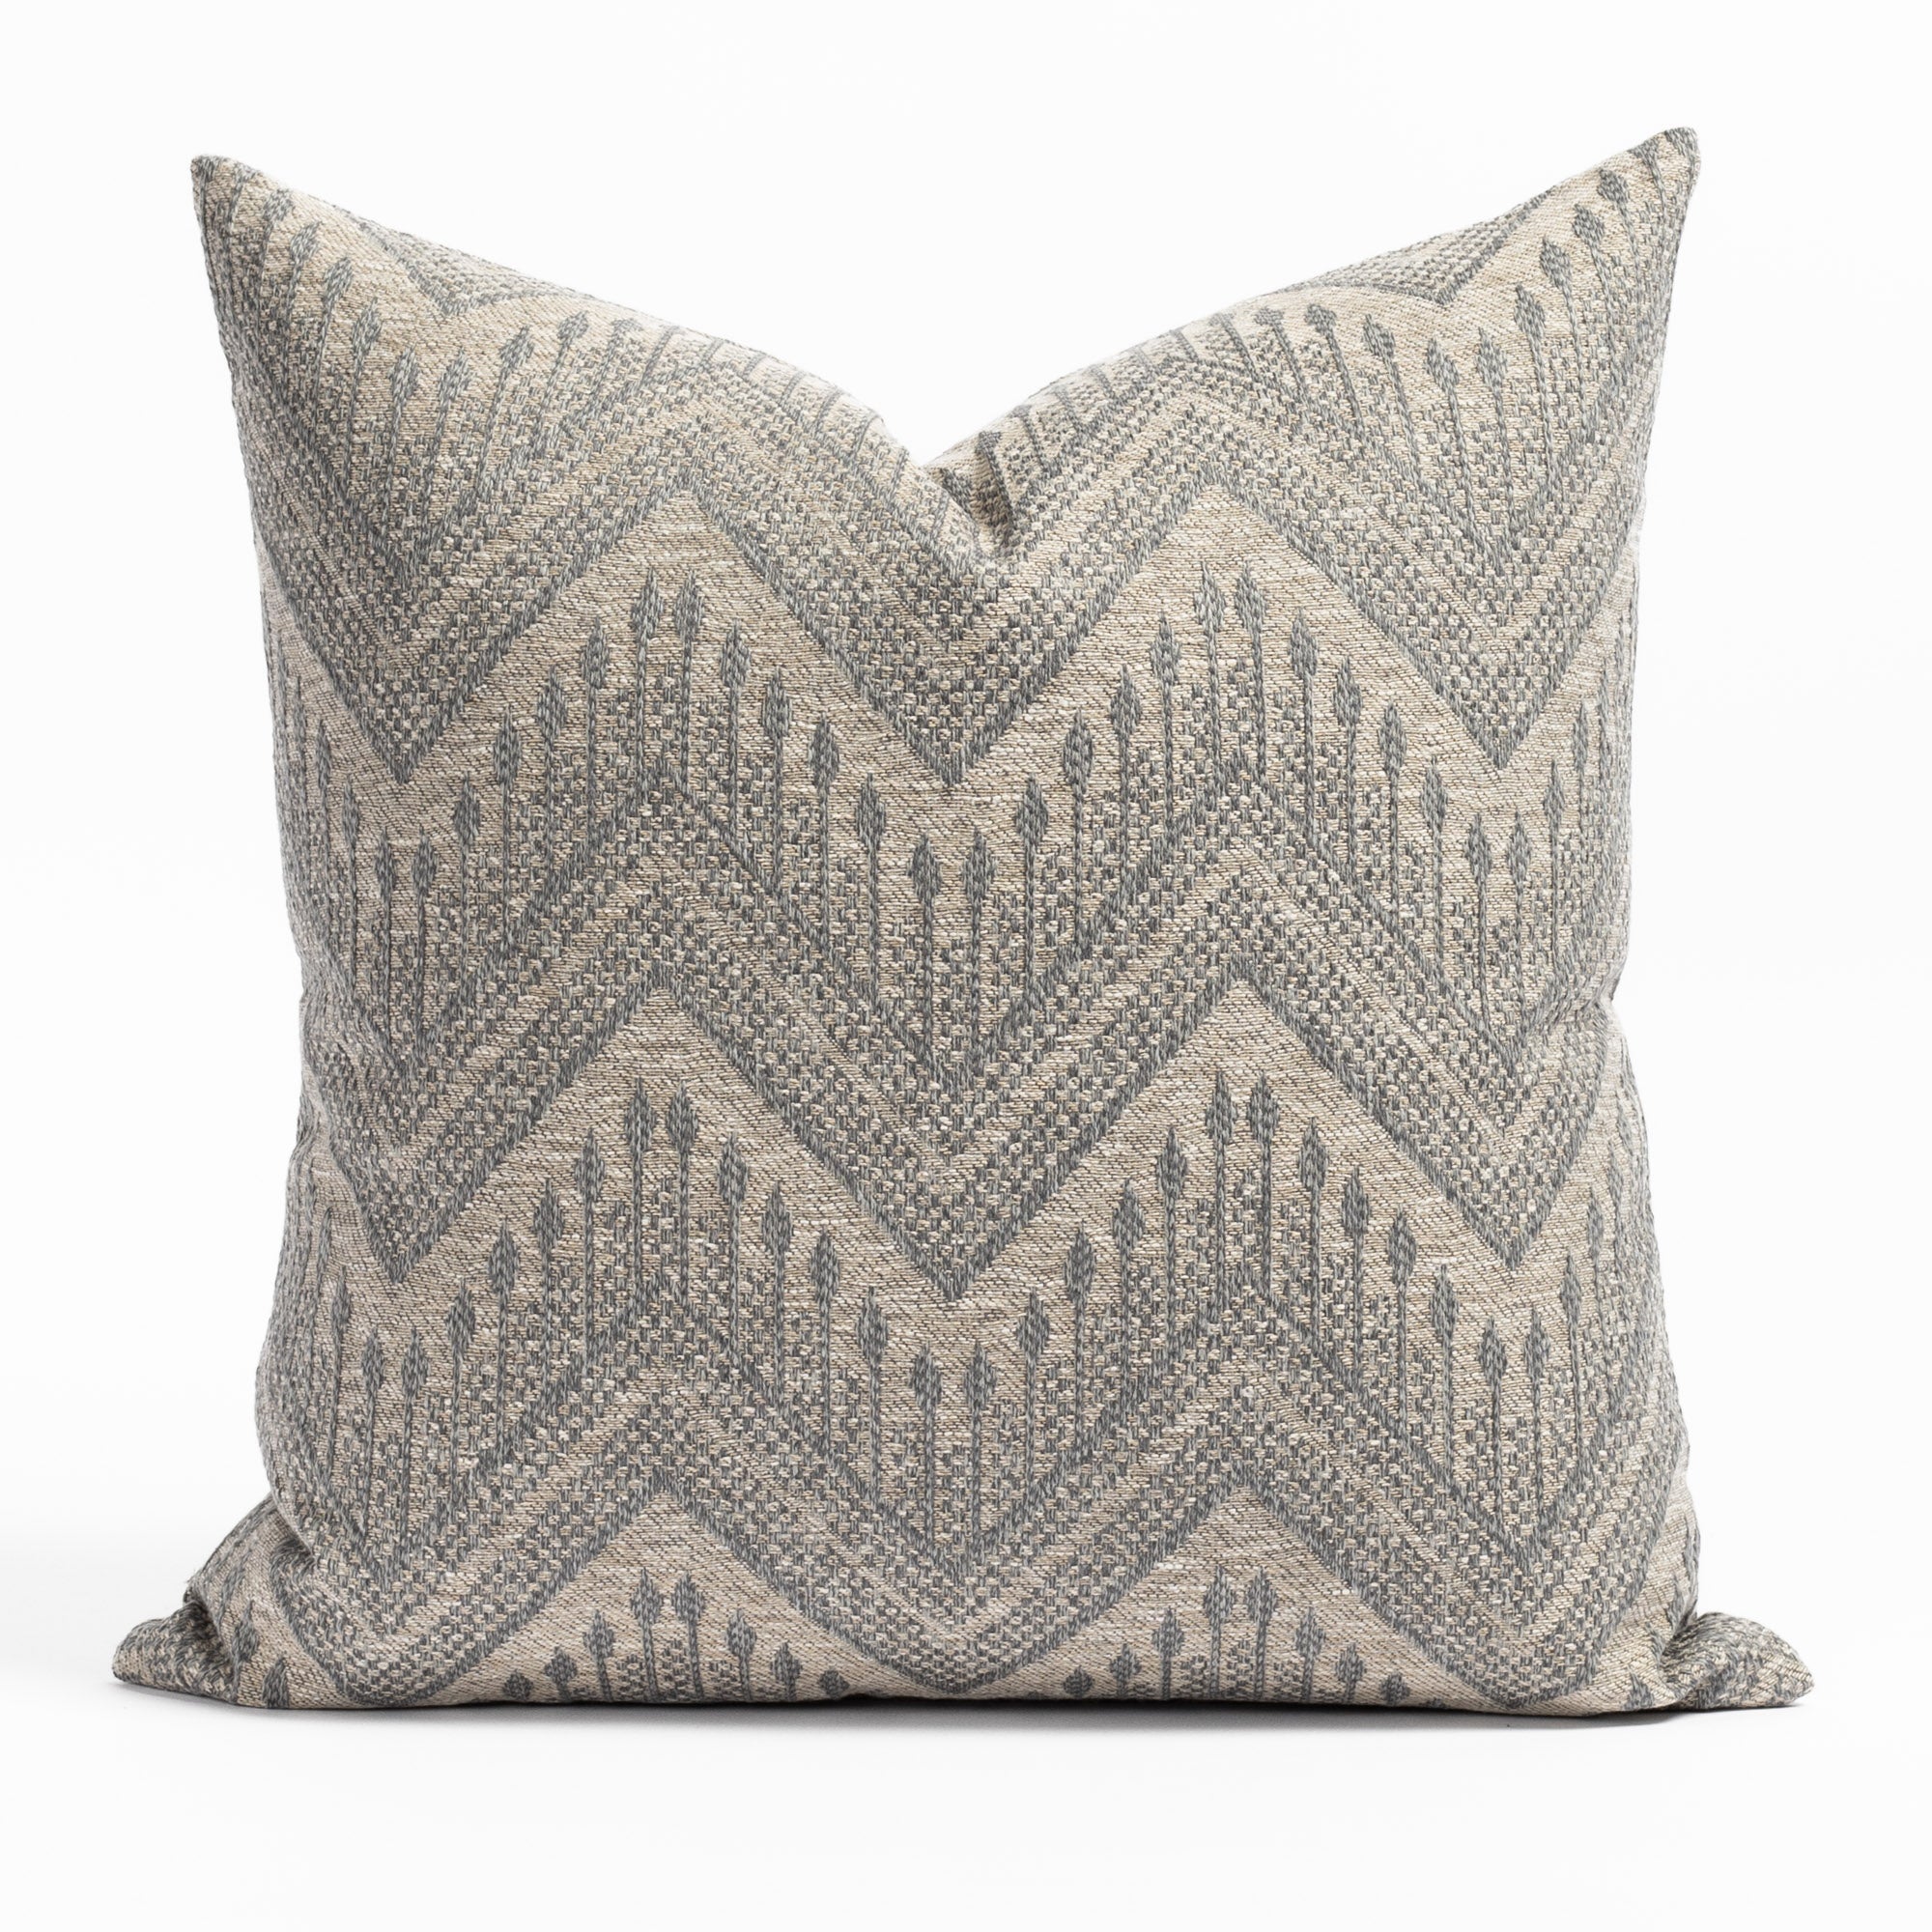 Joyce 22x22 Denim, a grey and denim blue intricate zig zag patterned throw pillow from Tonic Living